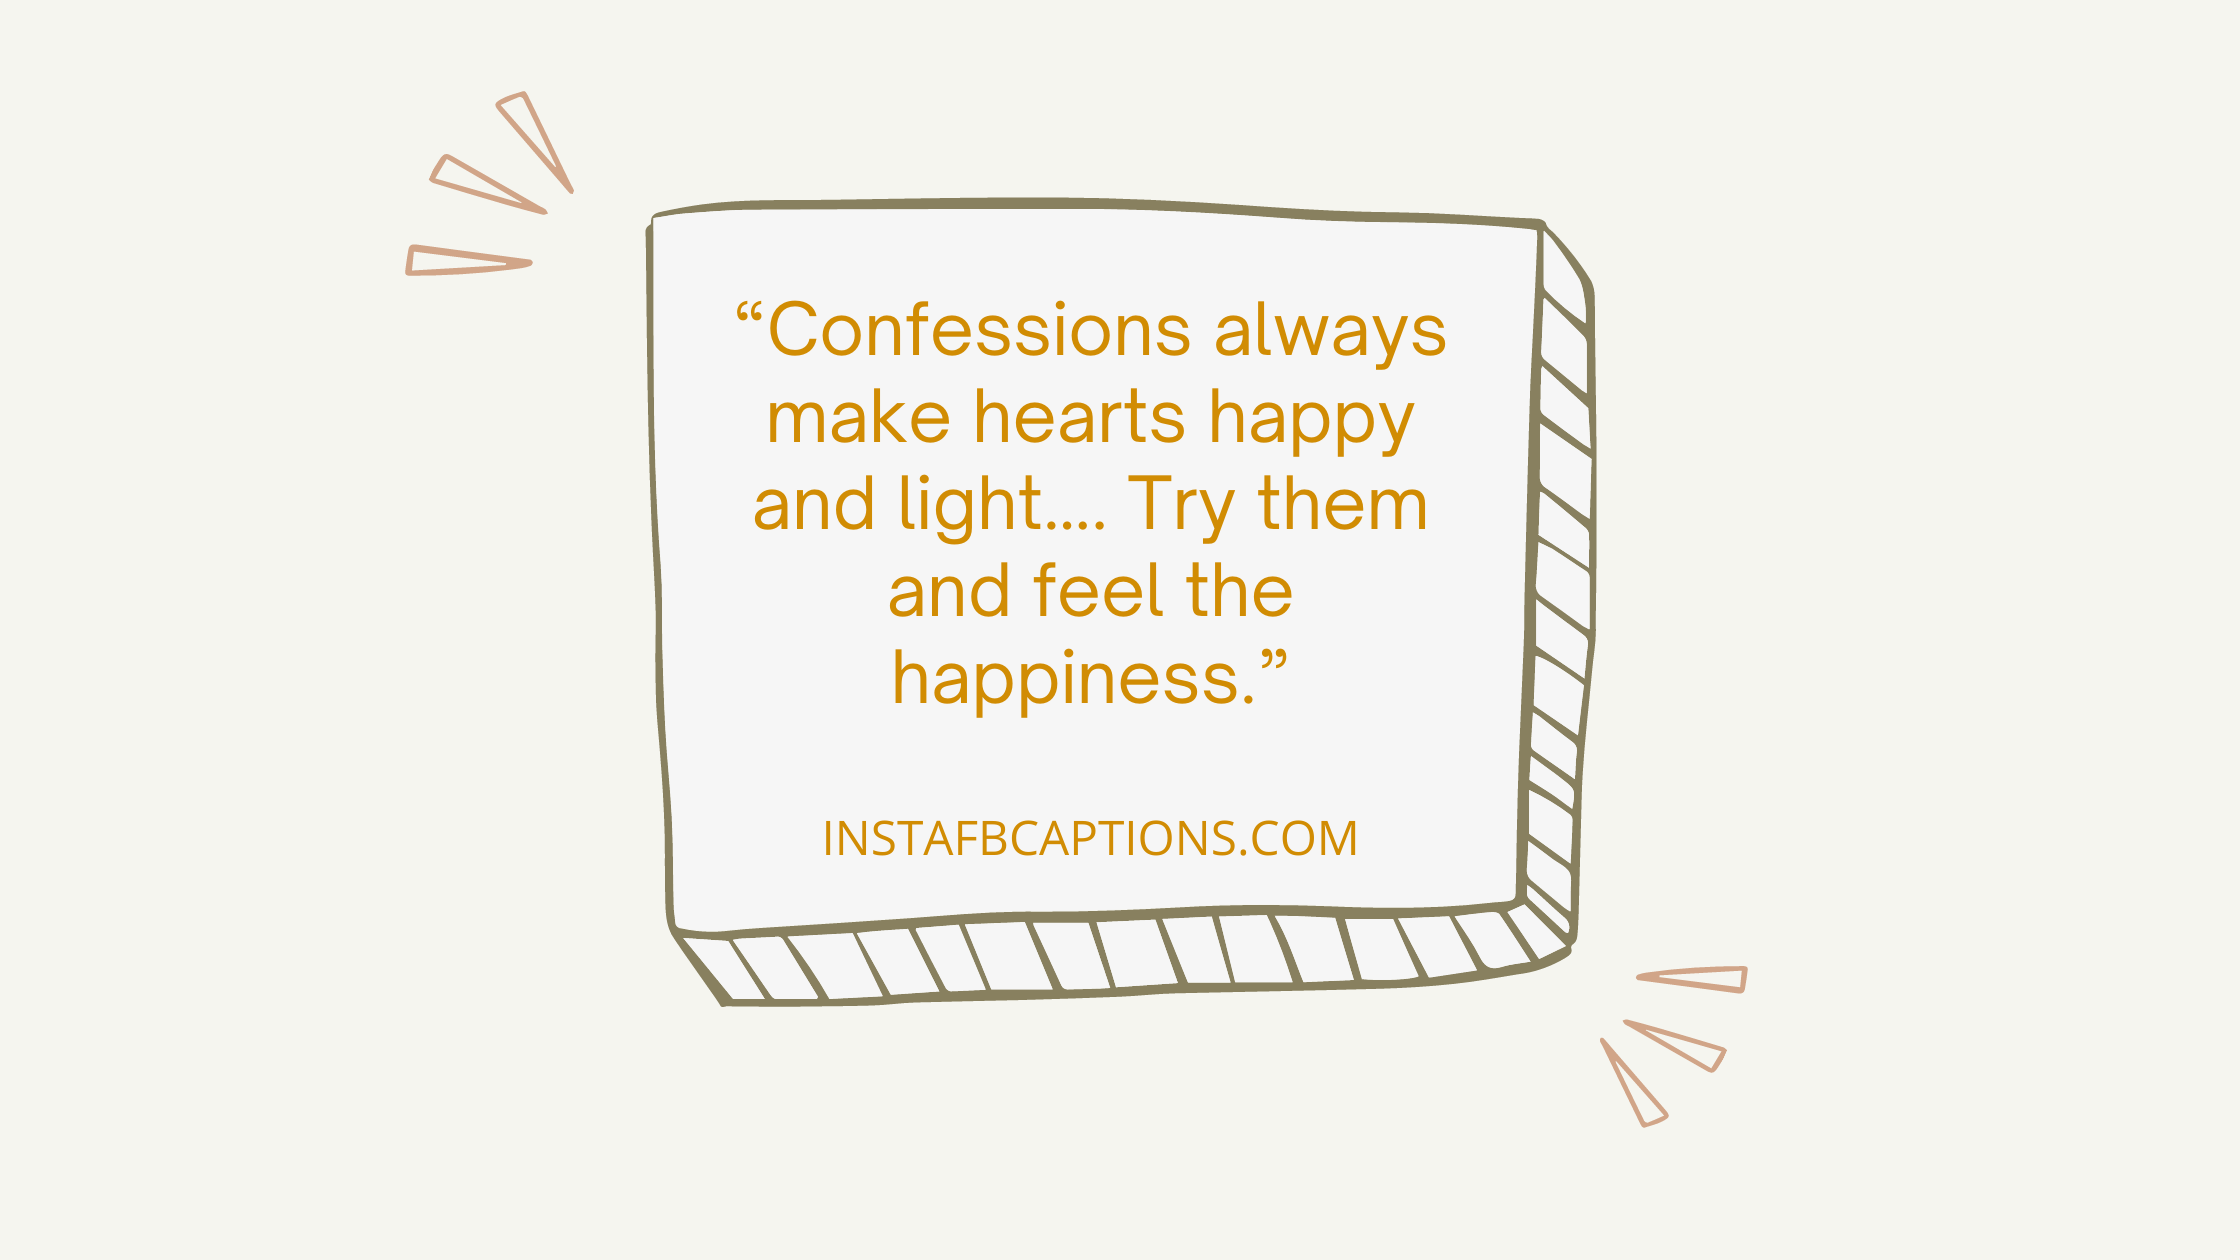 Amazing Happy Confession Day Wishes  - Amazing Happy Confession Day Wishes - 103 Happy Confession Day Instagram Captions in 2022